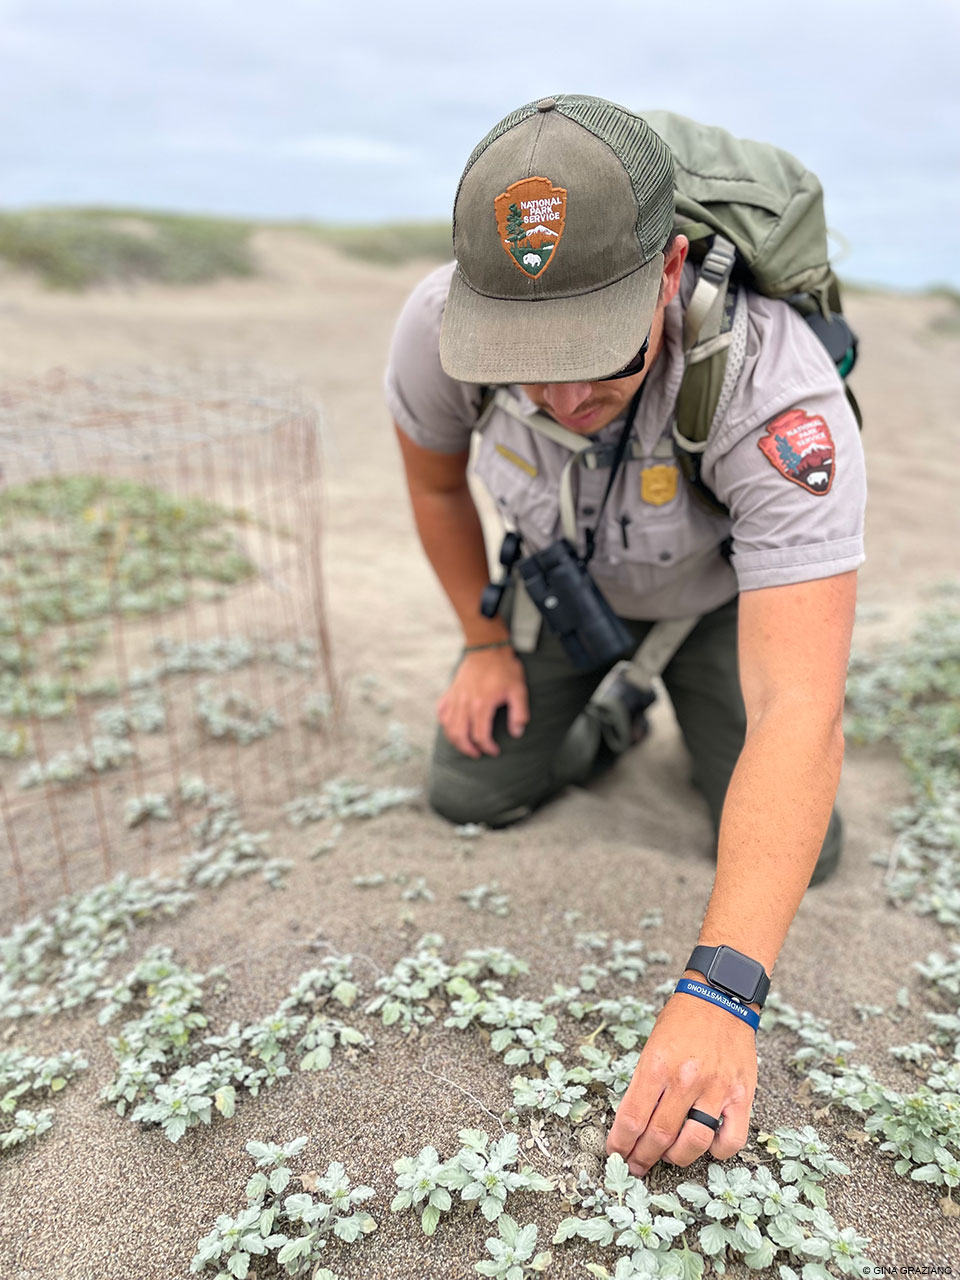 A photo of male National Park Service biologist kneeling in the sand and bending over to check small plover eggs in a nest surrounded by grayish-green plants.